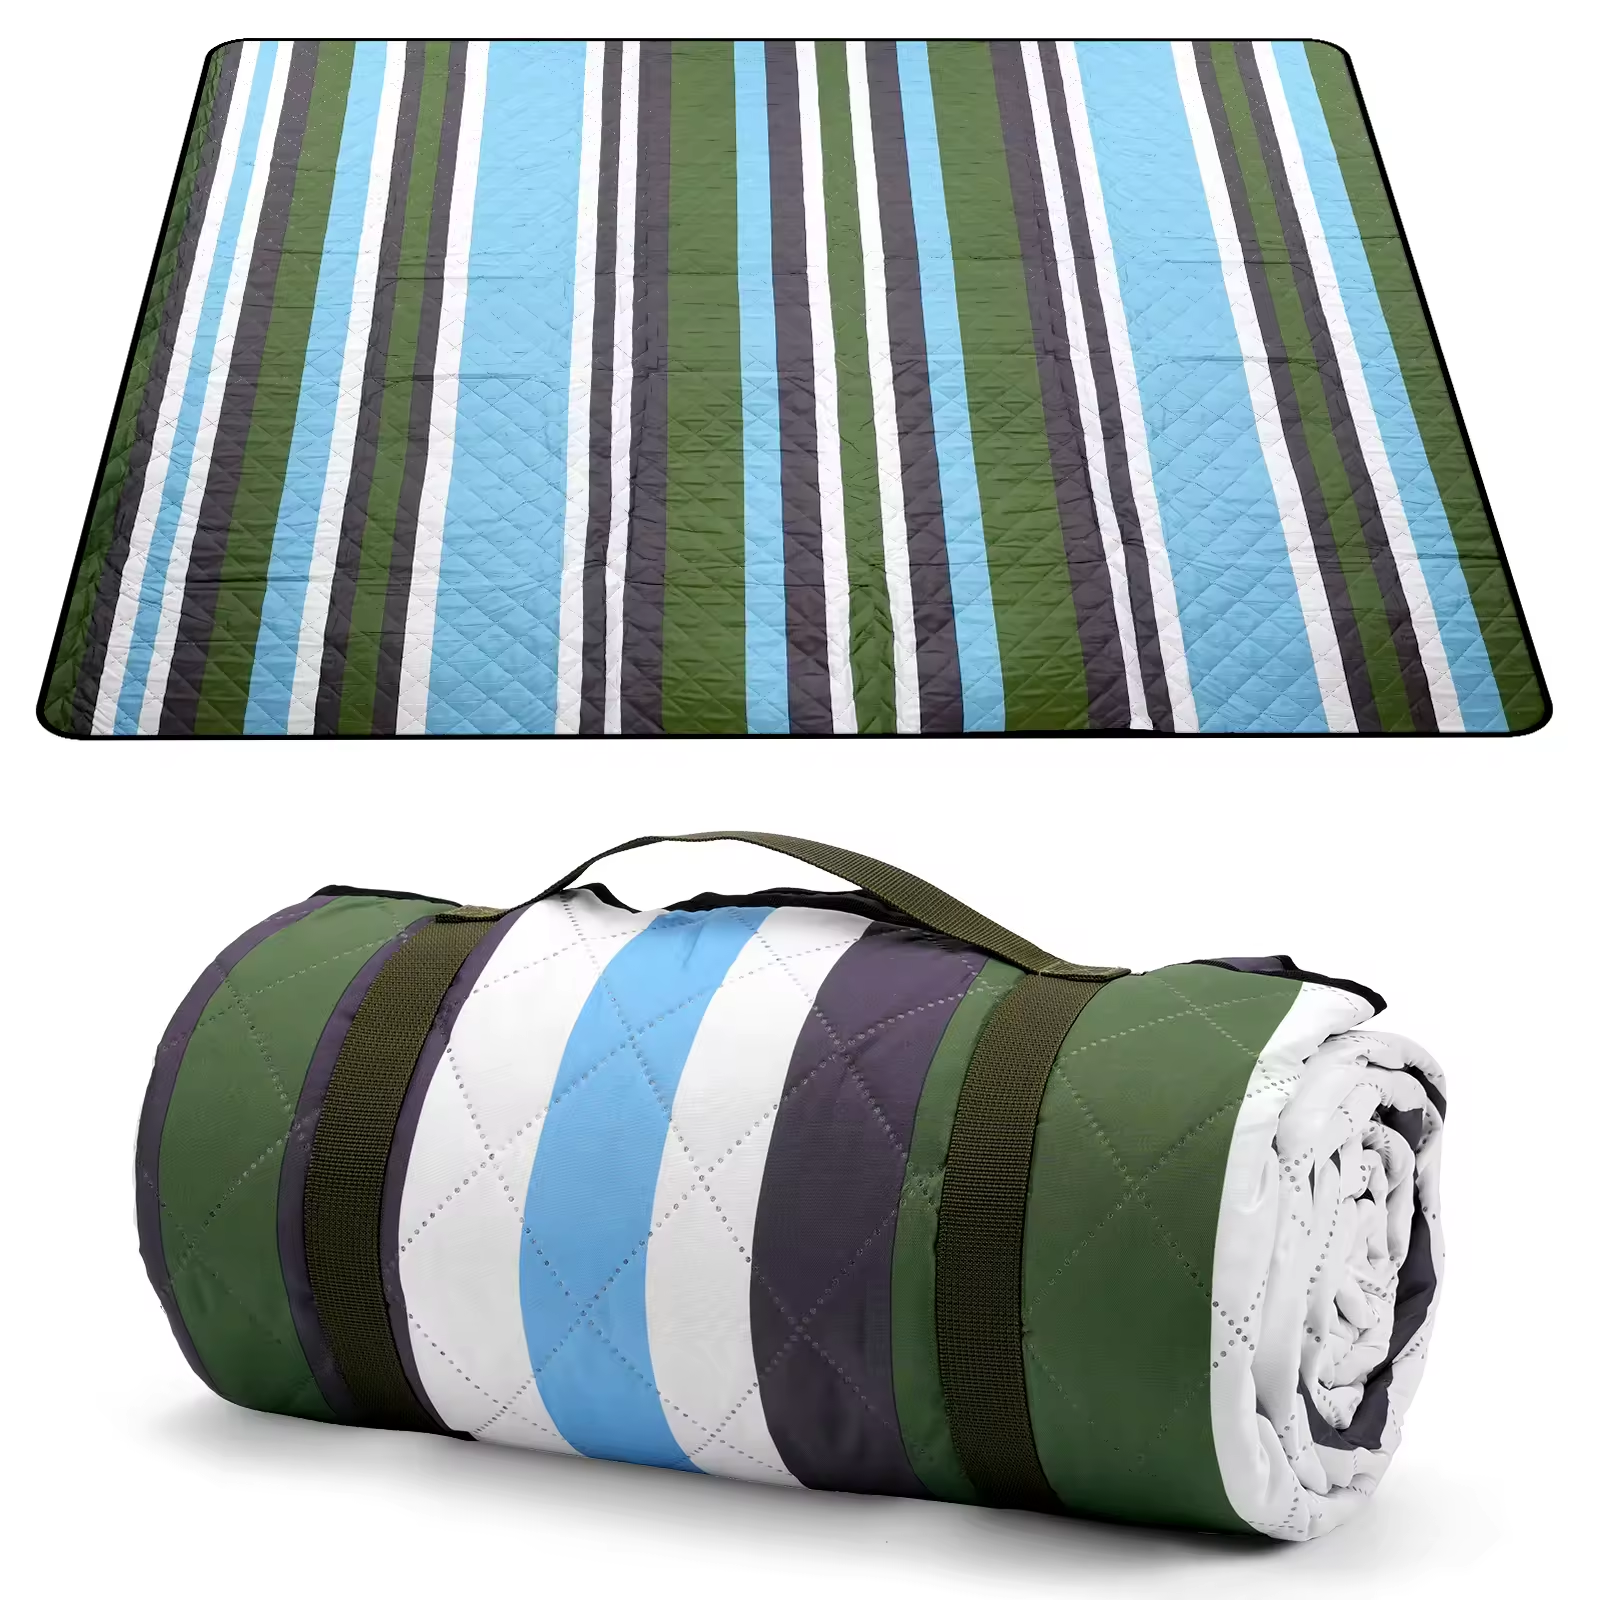 High Quality Portable Sand-proof Waterproof Polyester Camping Beach Blanket Beach Accessories Foldable Printed Picnic Beach Mat